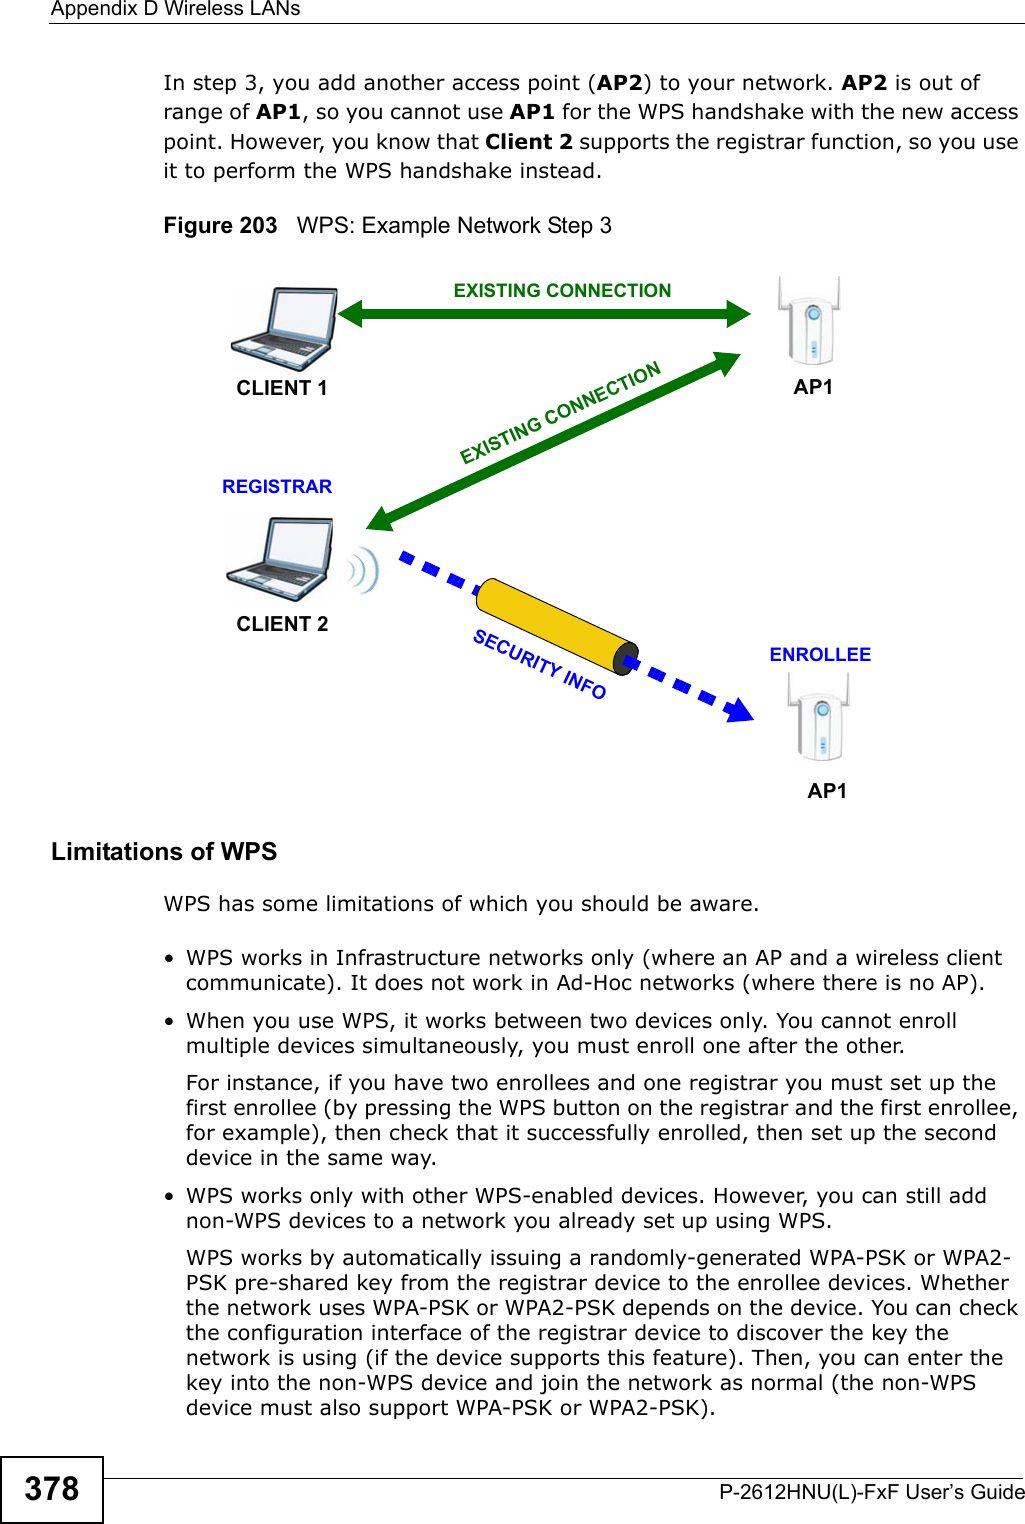 Appendix D Wireless LANsP-2612HNU(L)-FxF User’s Guide378In step 3, you add another access point (AP2) to your network. AP2 is out of range of AP1, so you cannot use AP1 for the WPS handshake with the new access point. However, you know that Client 2 supports the registrar function, so you use it to perform the WPS handshake instead.Figure 203   WPS: Example Network Step 3Limitations of WPSWPS has some limitations of which you should be aware. • WPS works in Infrastructure networks only (where an AP and a wireless client communicate). It does not work in Ad-Hoc networks (where there is no AP).• When you use WPS, it works between two devices only. You cannot enroll multiple devices simultaneously, you must enroll one after the other.For instance, if you have two enrollees and one registrar you must set up the first enrollee (by pressing the WPS button on the registrar and the first enrollee,for example), then check that it successfully enrolled, then set up the second device in the same way.• WPS works only with other WPS-enabled devices. However, you can still add non-WPS devices to a network you already set up using WPS.WPS works by automatically issuing a randomly-generated WPA-PSK or WPA2-PSK pre-shared key from the registrar device to the enrollee devices. Whether the network uses WPA-PSK or WPA2-PSK depends on the device. You can check the configuration interface of the registrar device to discover the key the network is using (if the device supports this feature). Then, you can enter the key into the non-WPS device and join the network as normal (the non-WPS device must also support WPA-PSK or WPA2-PSK).CLIENT 1 AP1REGISTRARCLIENT 2EXISTING CONNECTIONSECURITYINFOENROLLEEAP1EXISTINGCONNECTION